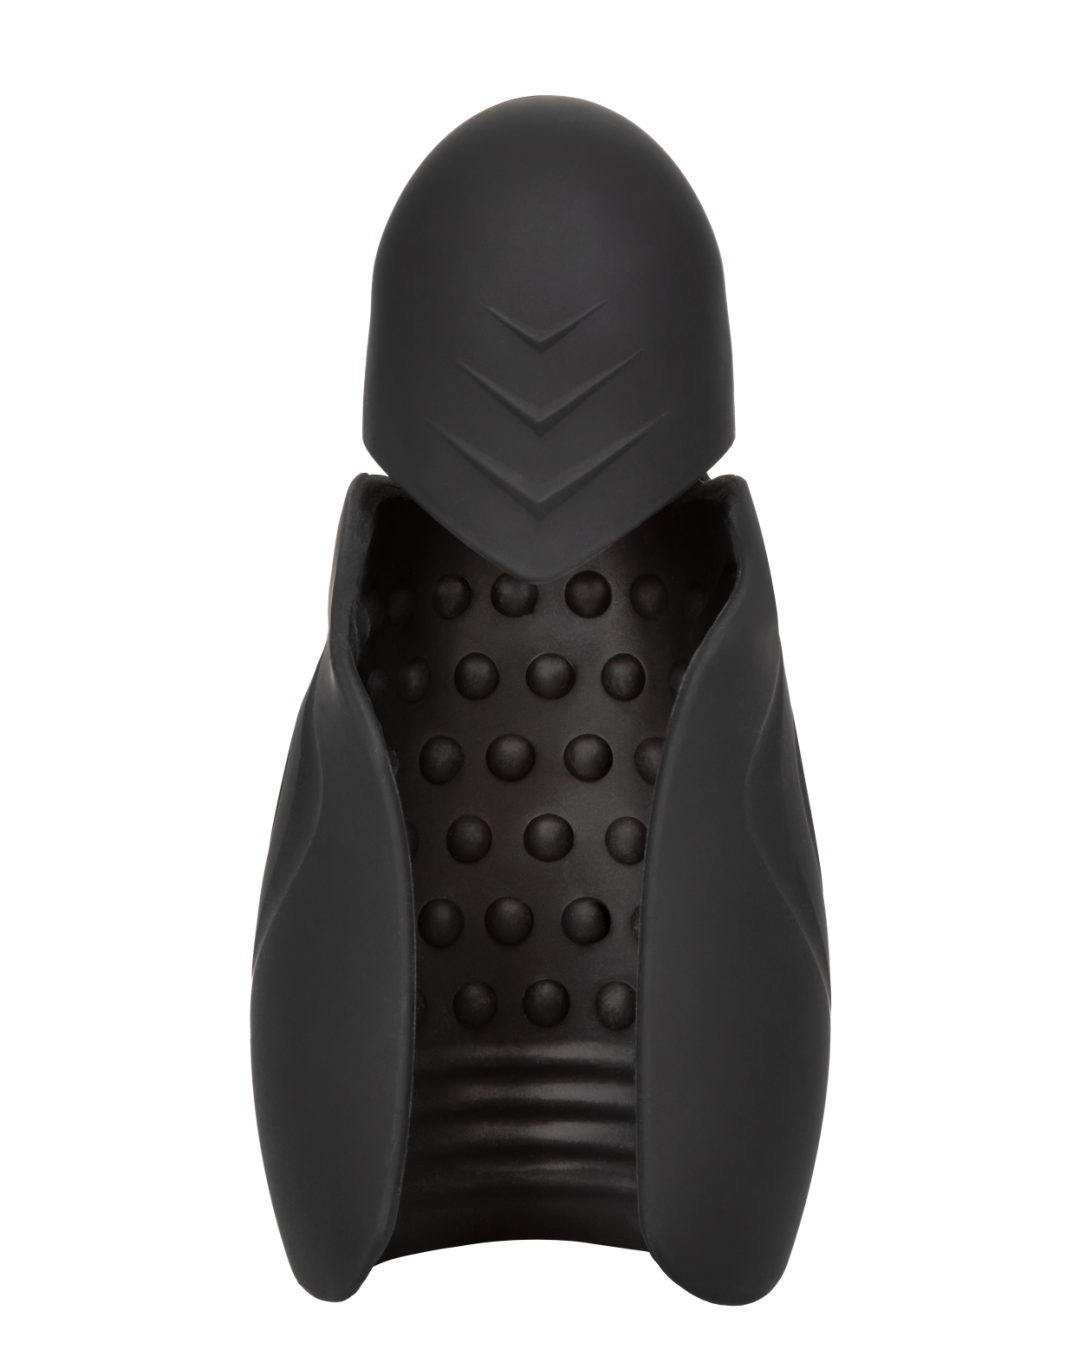 Optimum Power Elite Vibrating Penis Stroker with Head Teaser vertical against a white background with an interior view of the pleasure nubs